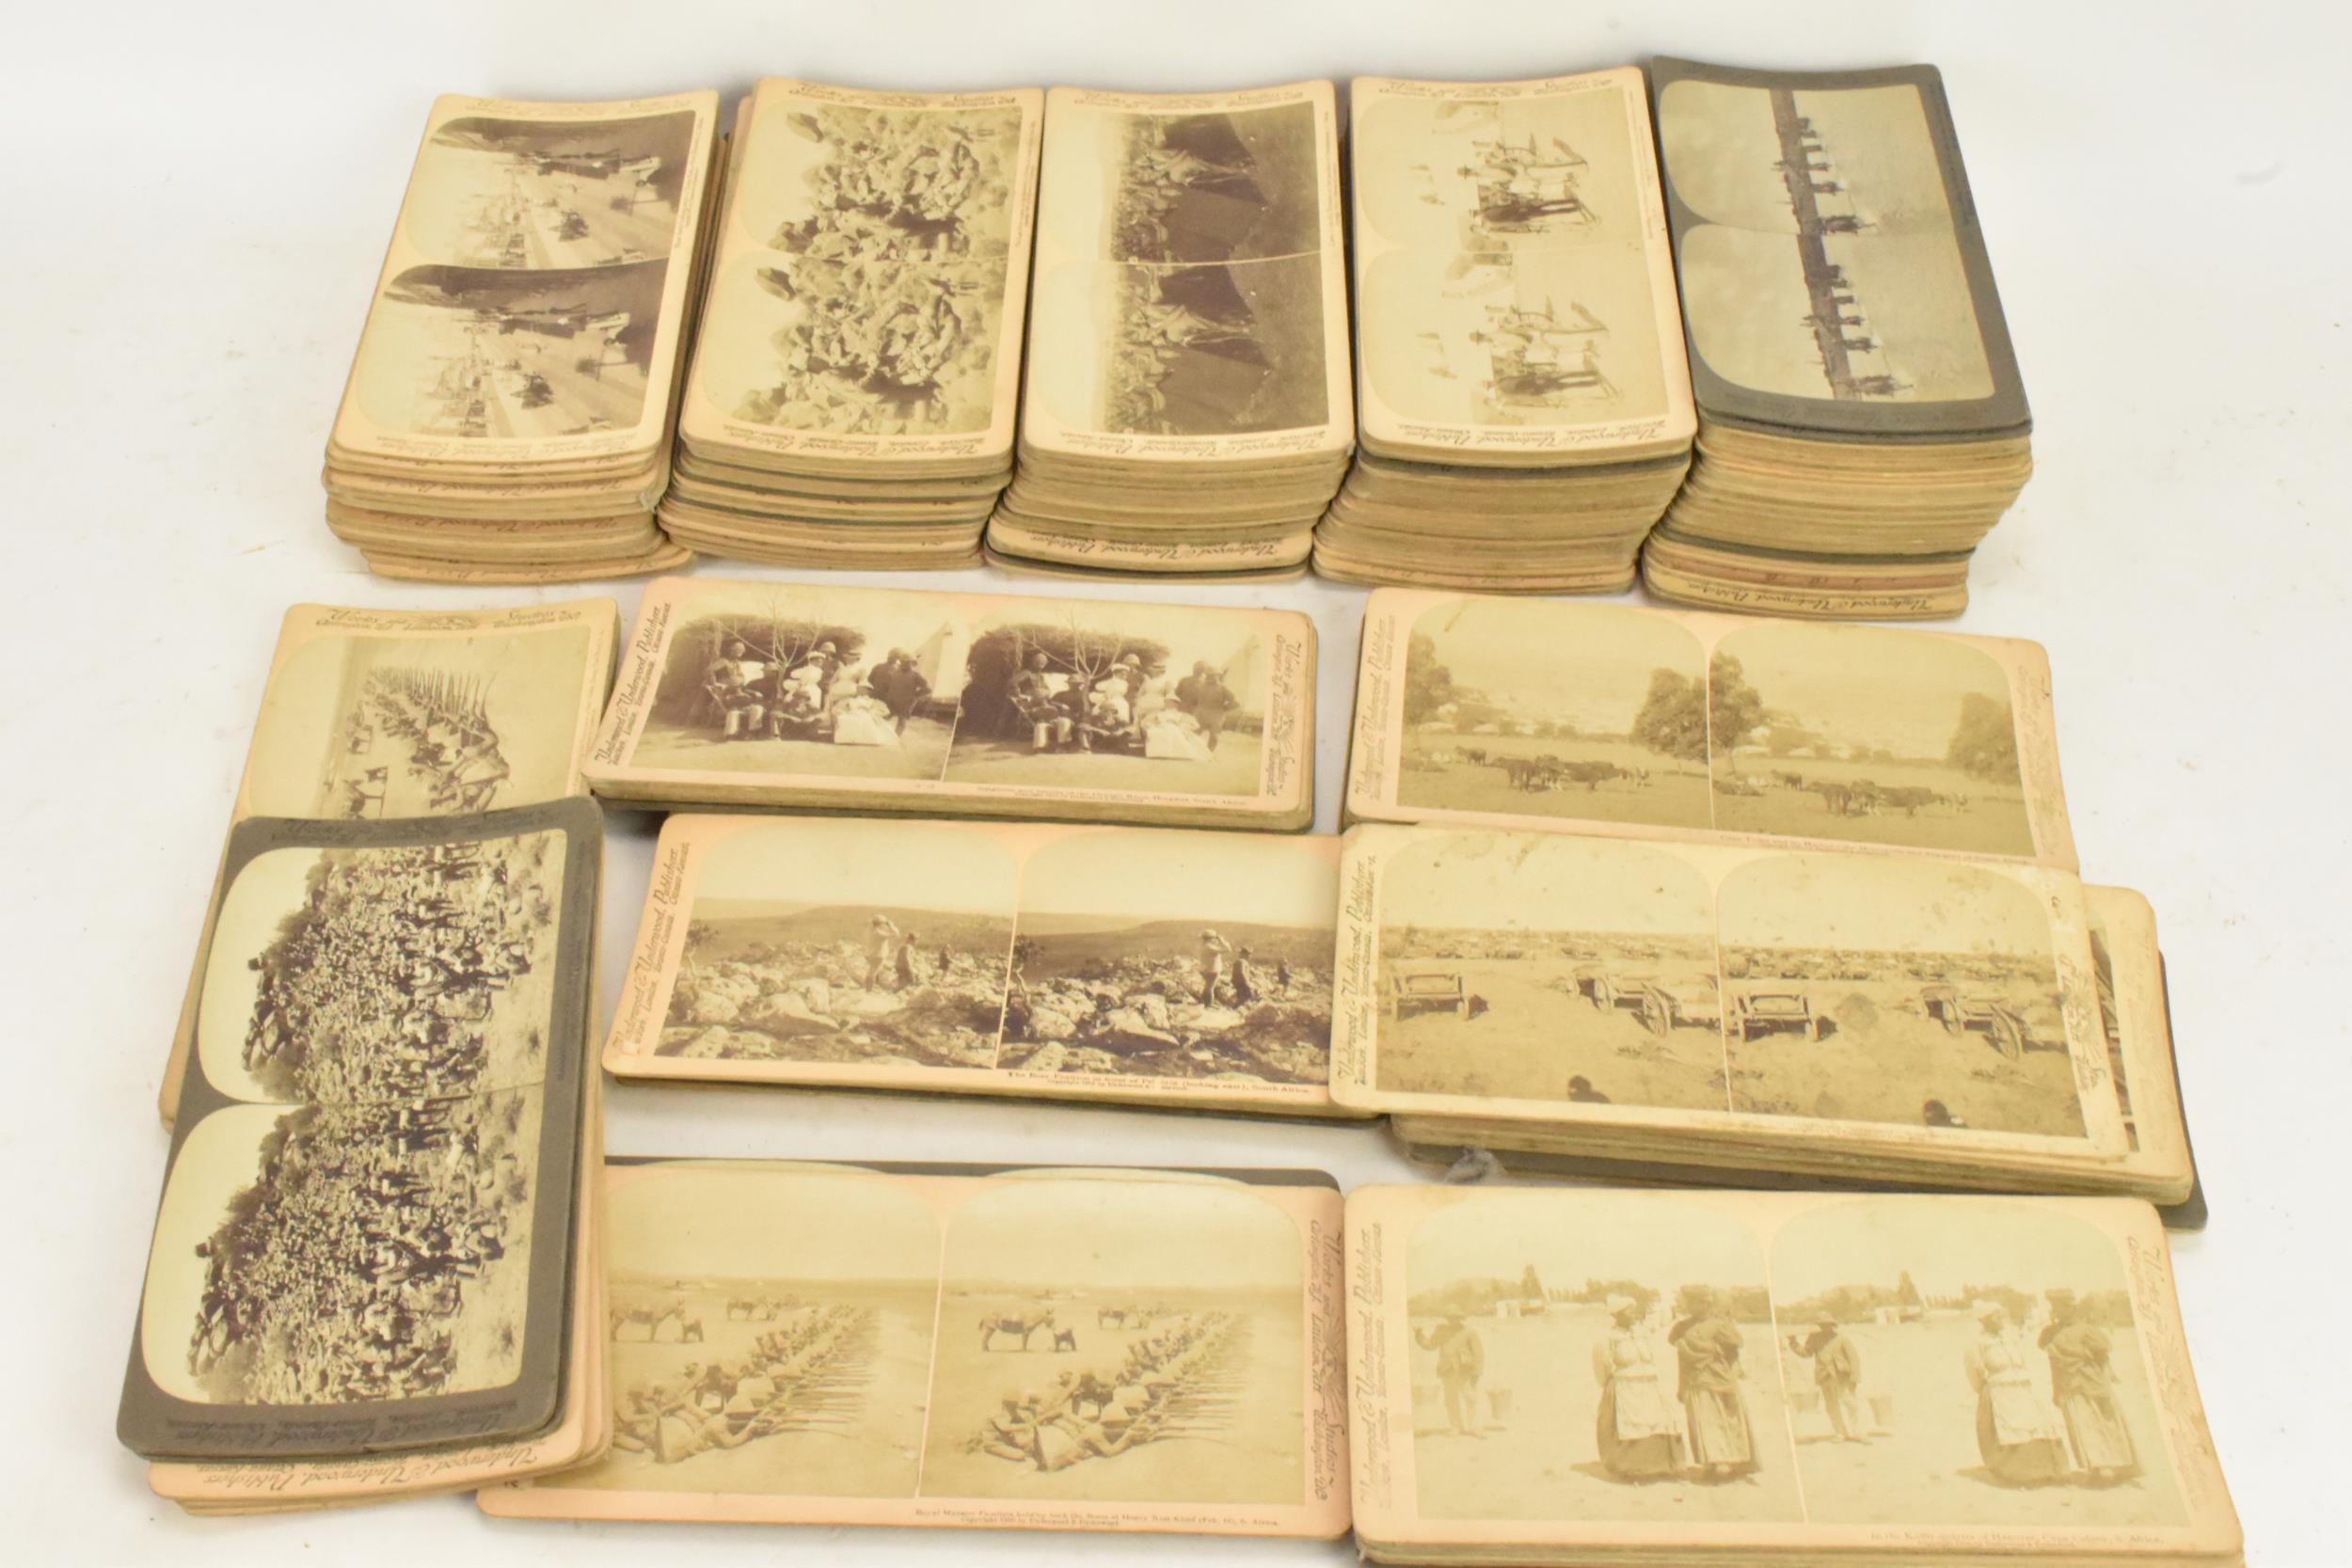 Photography, Military Boer war interest- a collection of stereoscopic cards depicting The South